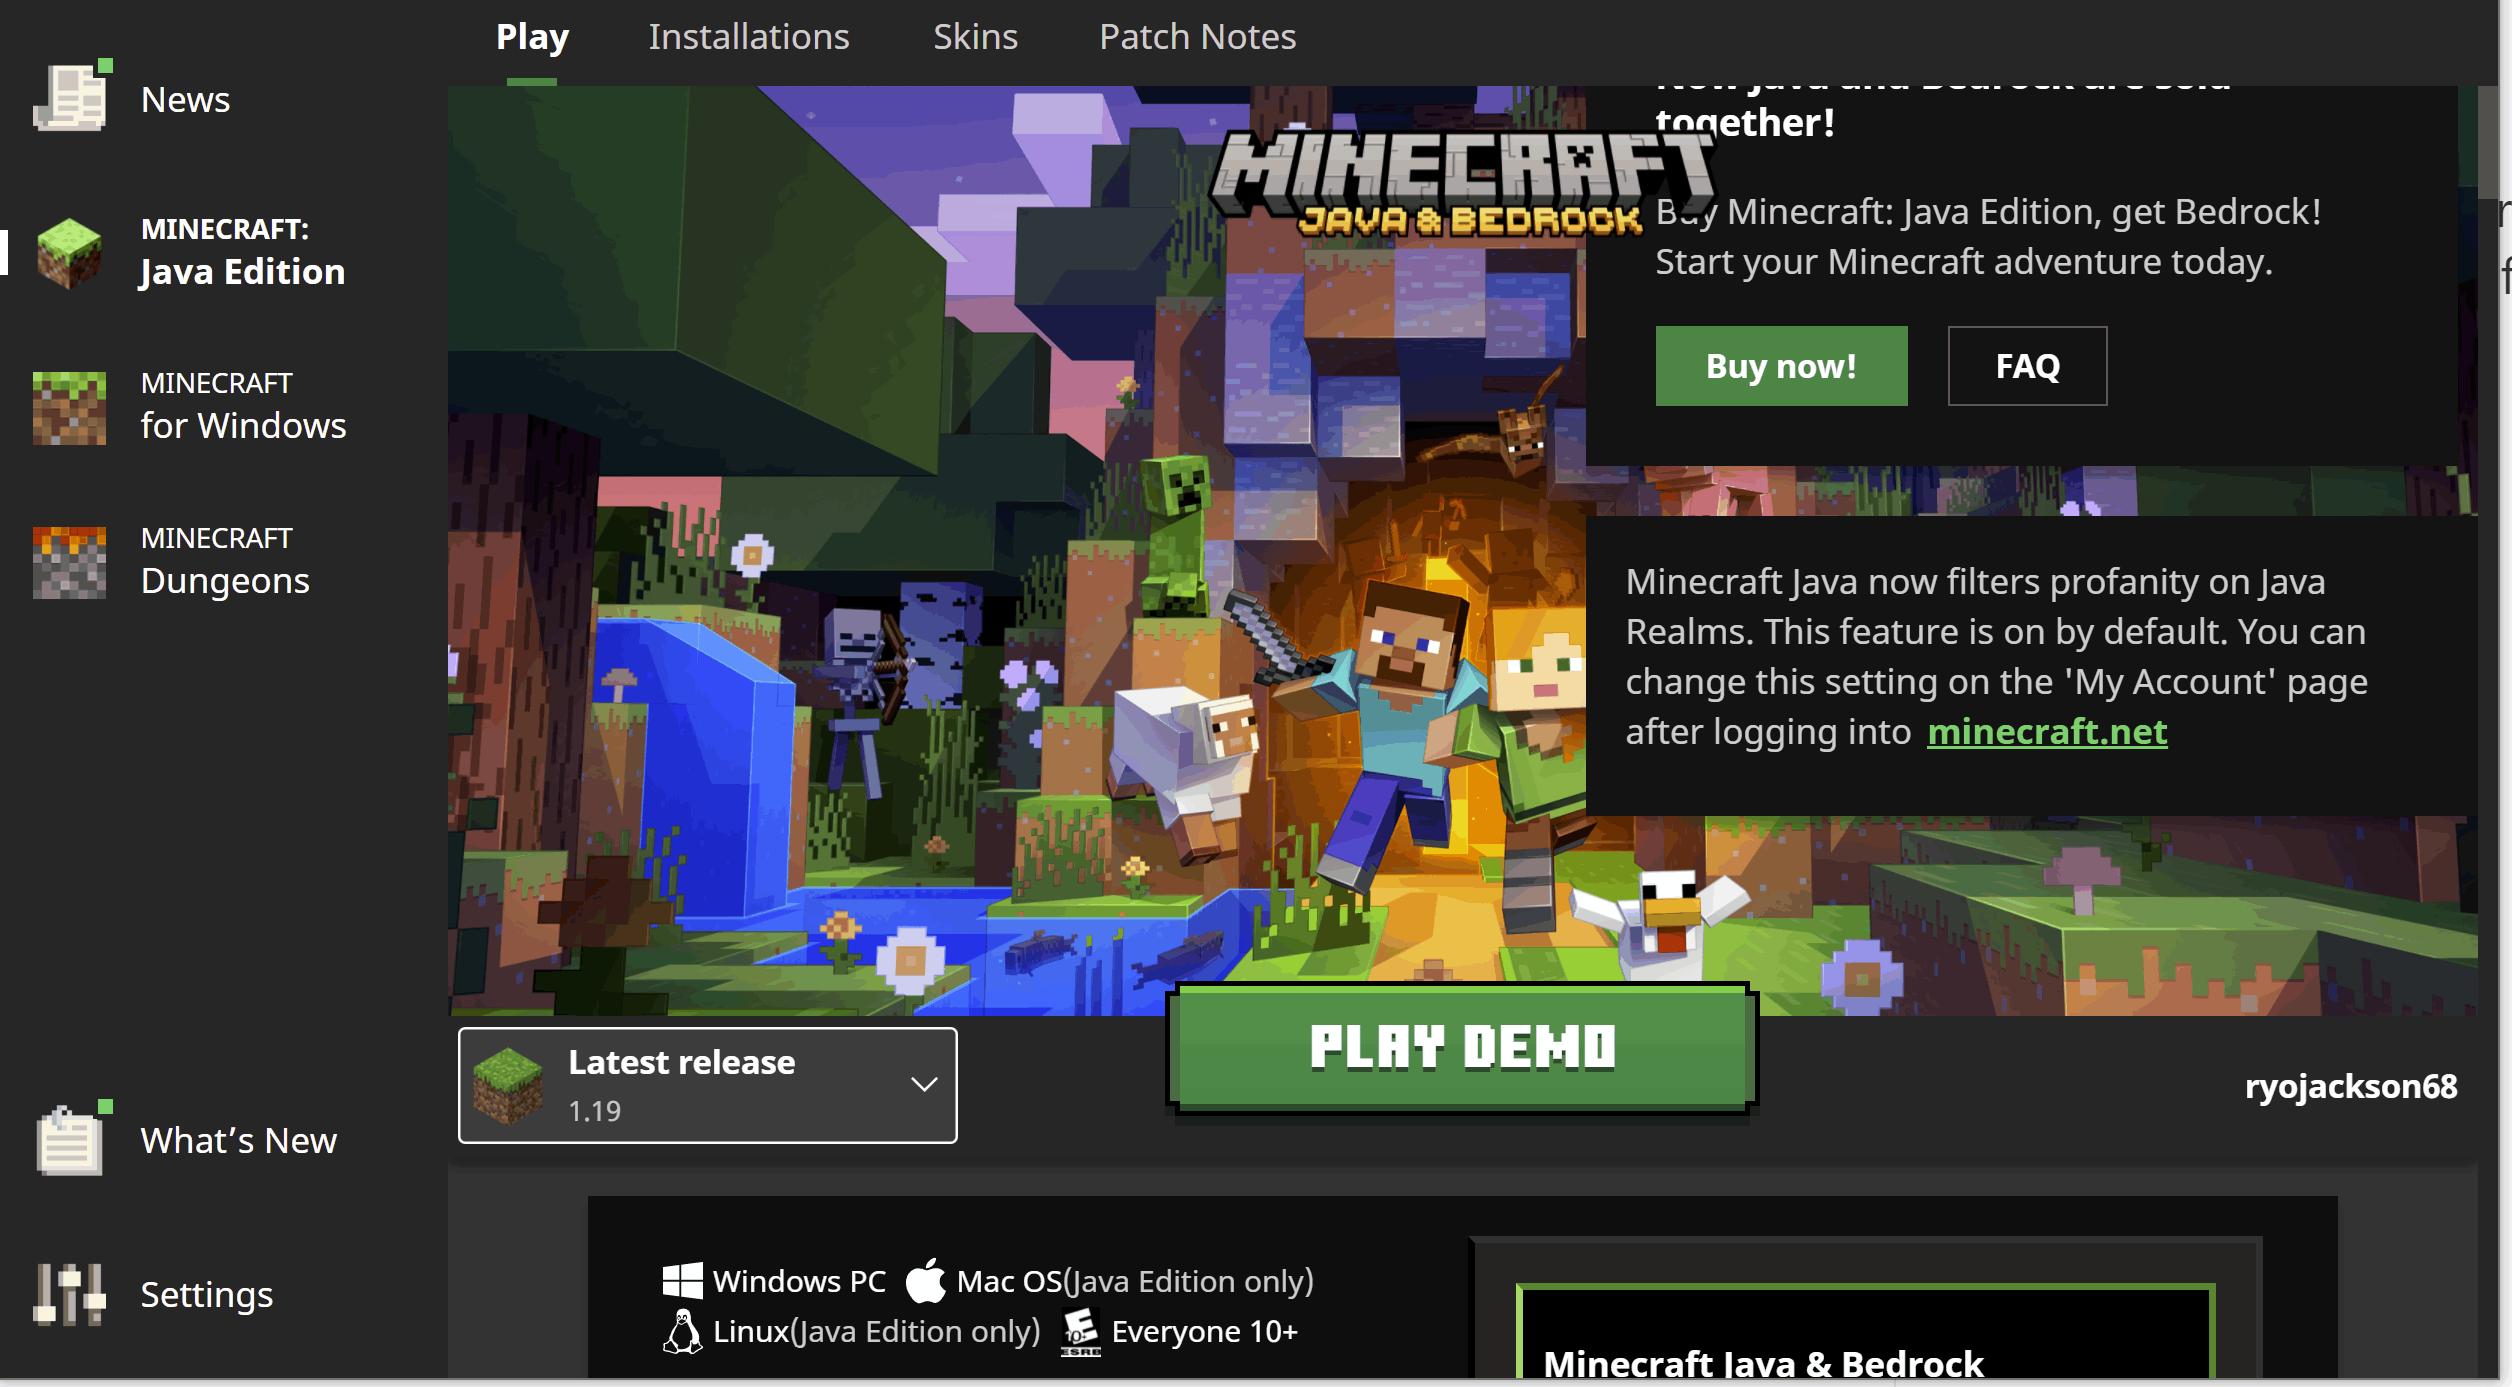 Mojang launch Minecraft.net as the official community hub and news